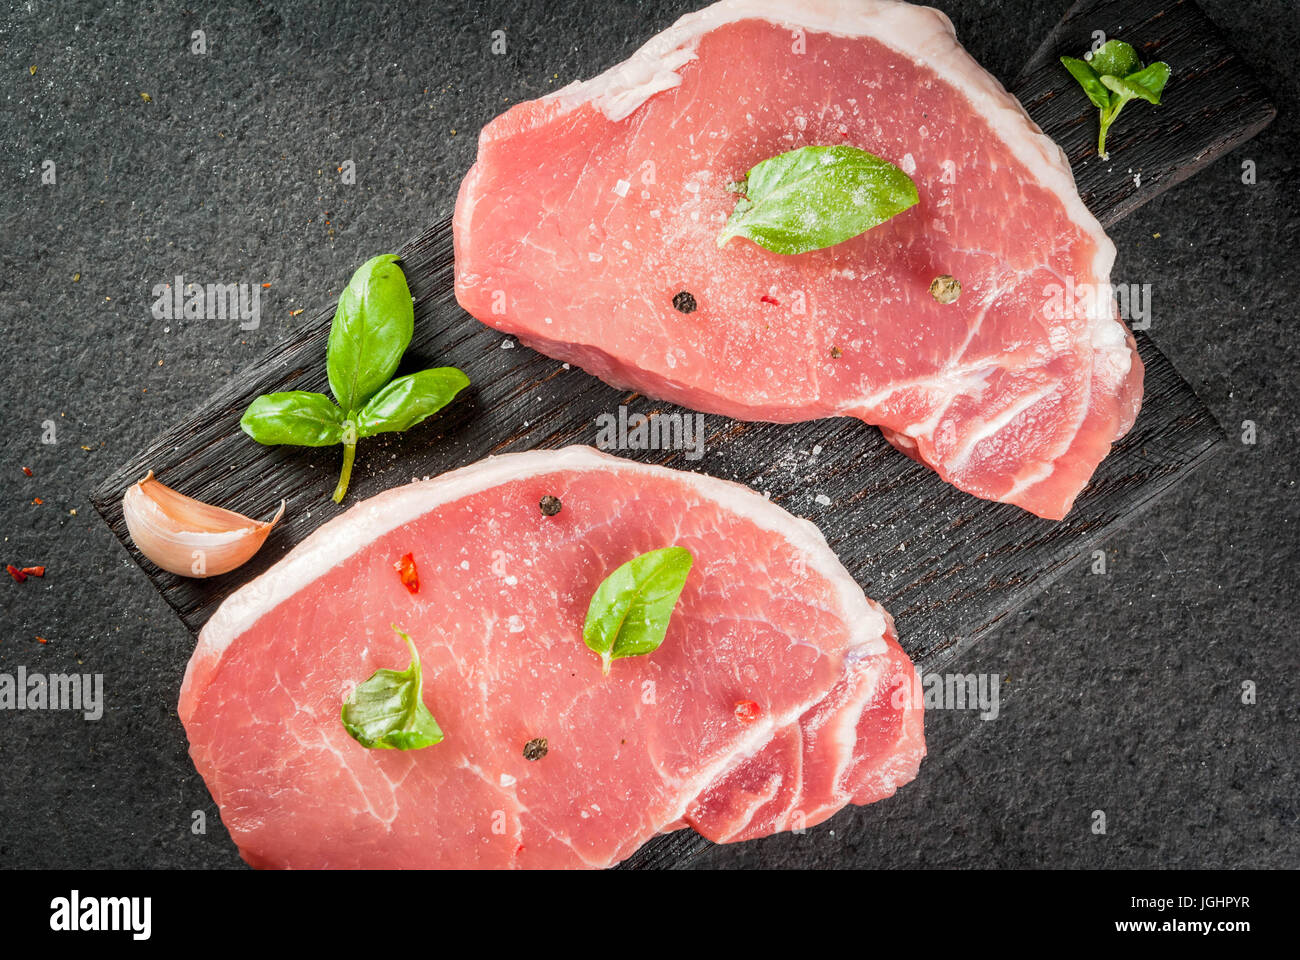 Raw organic meat. Pork steaks, fillets for grilling, baking or frying. On a wooden cutting board, with salt, pepper, basil, tomatoes, garlic. On a gra Stock Photo